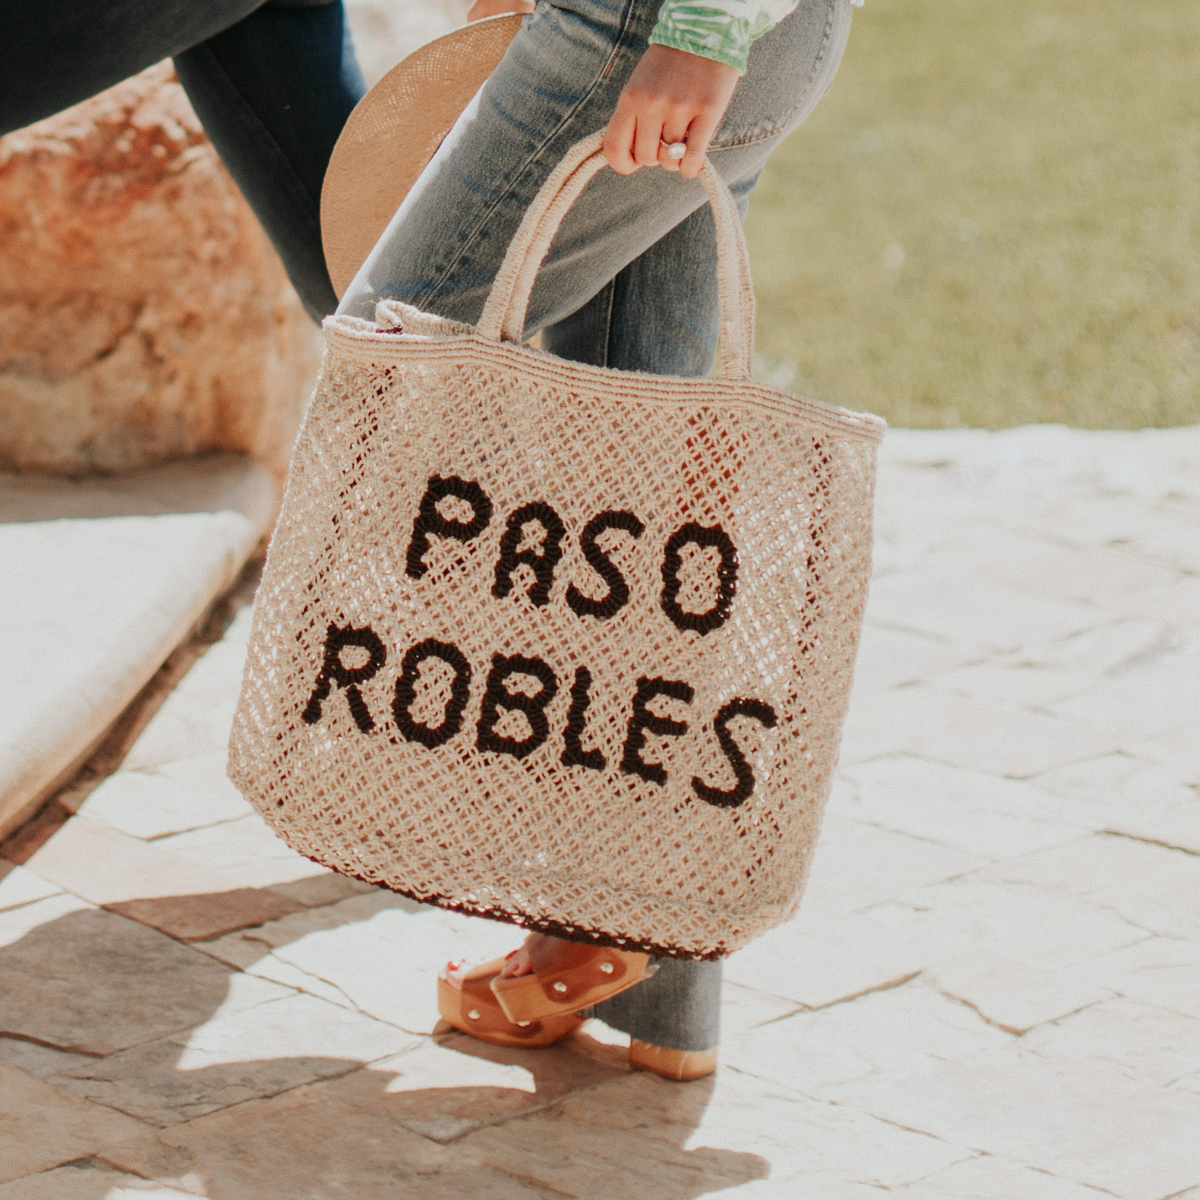 Exclusive Paso Robles Handwoven Jute Tote in Natural & Black